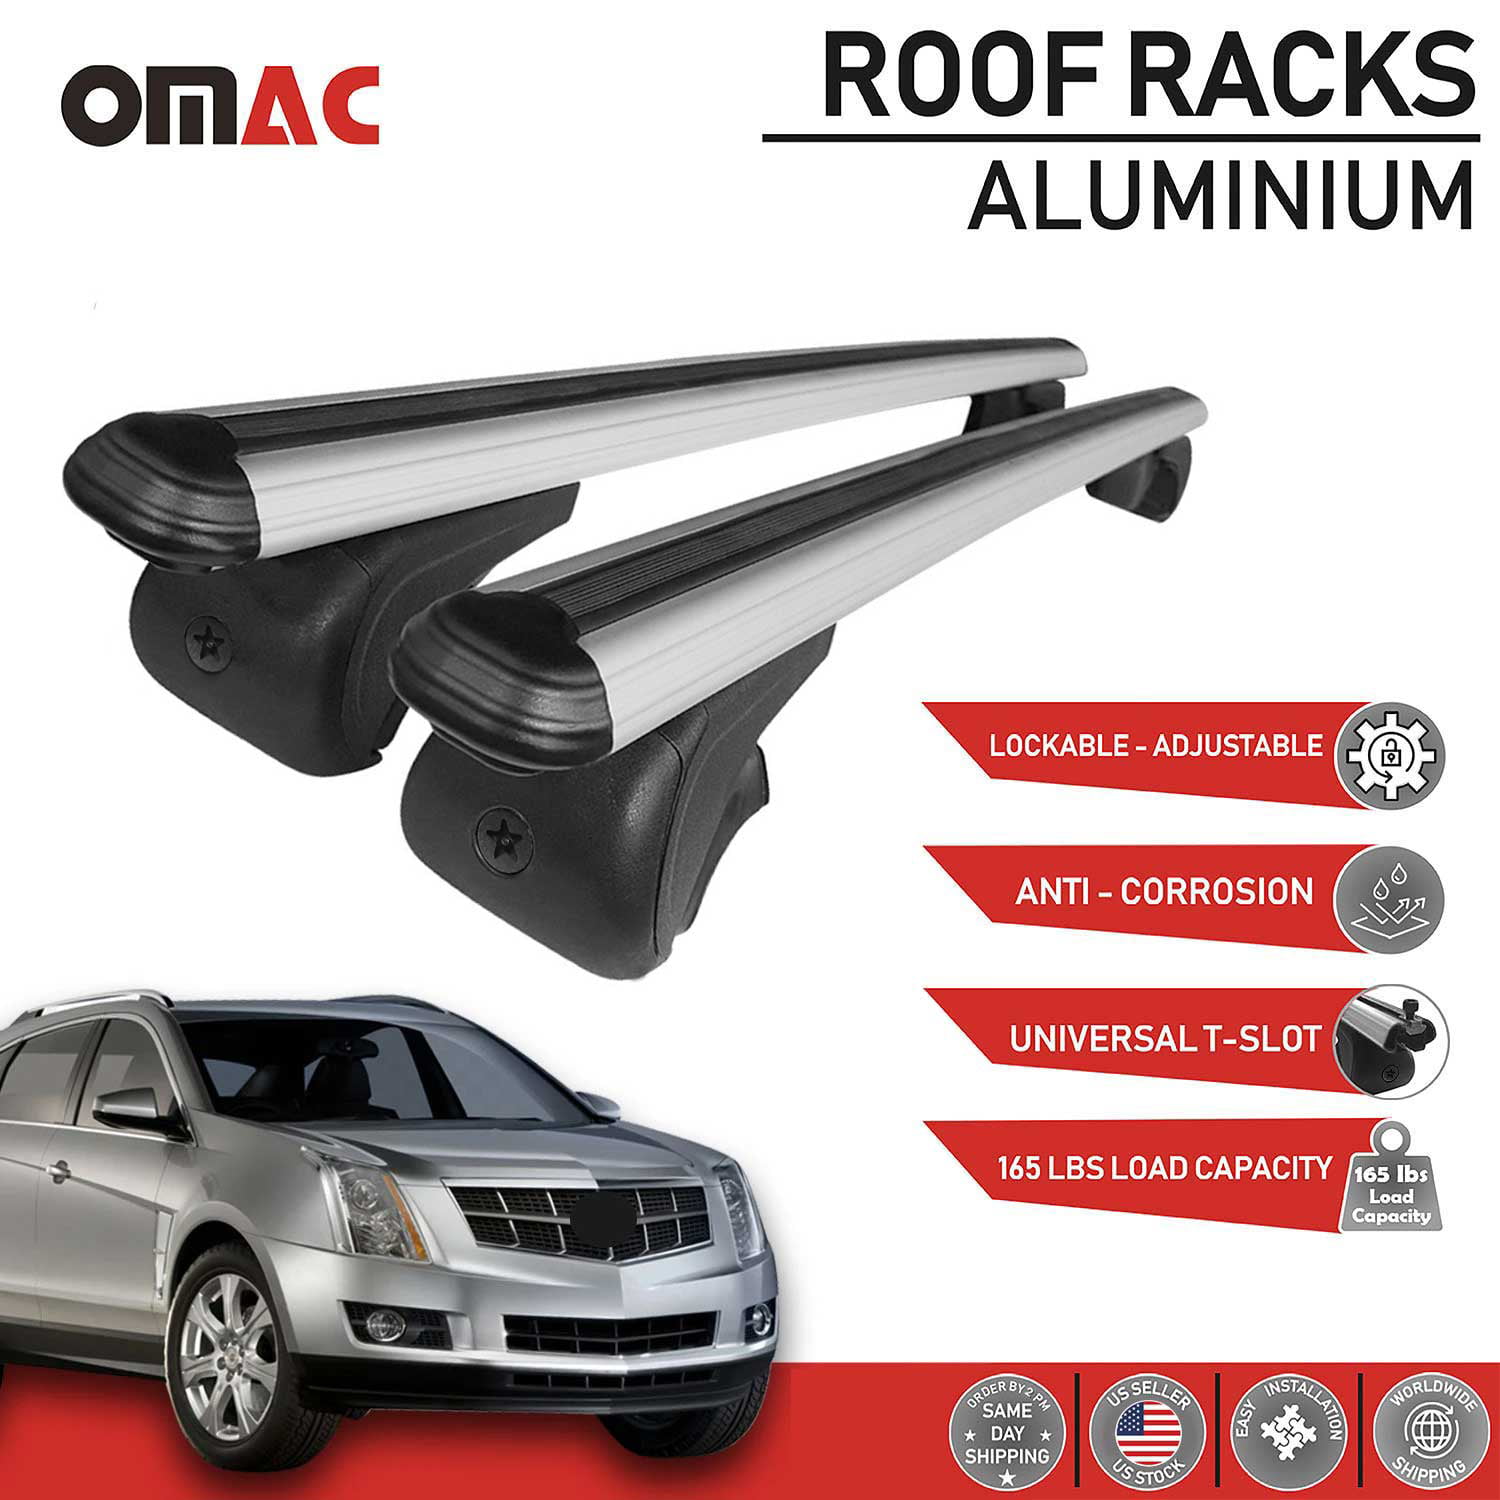 OMAC 21029696929M Roof Rack for Cadillac SRX 2005-2016 Cross Bars Luggage  Carrier Silver Aluminum